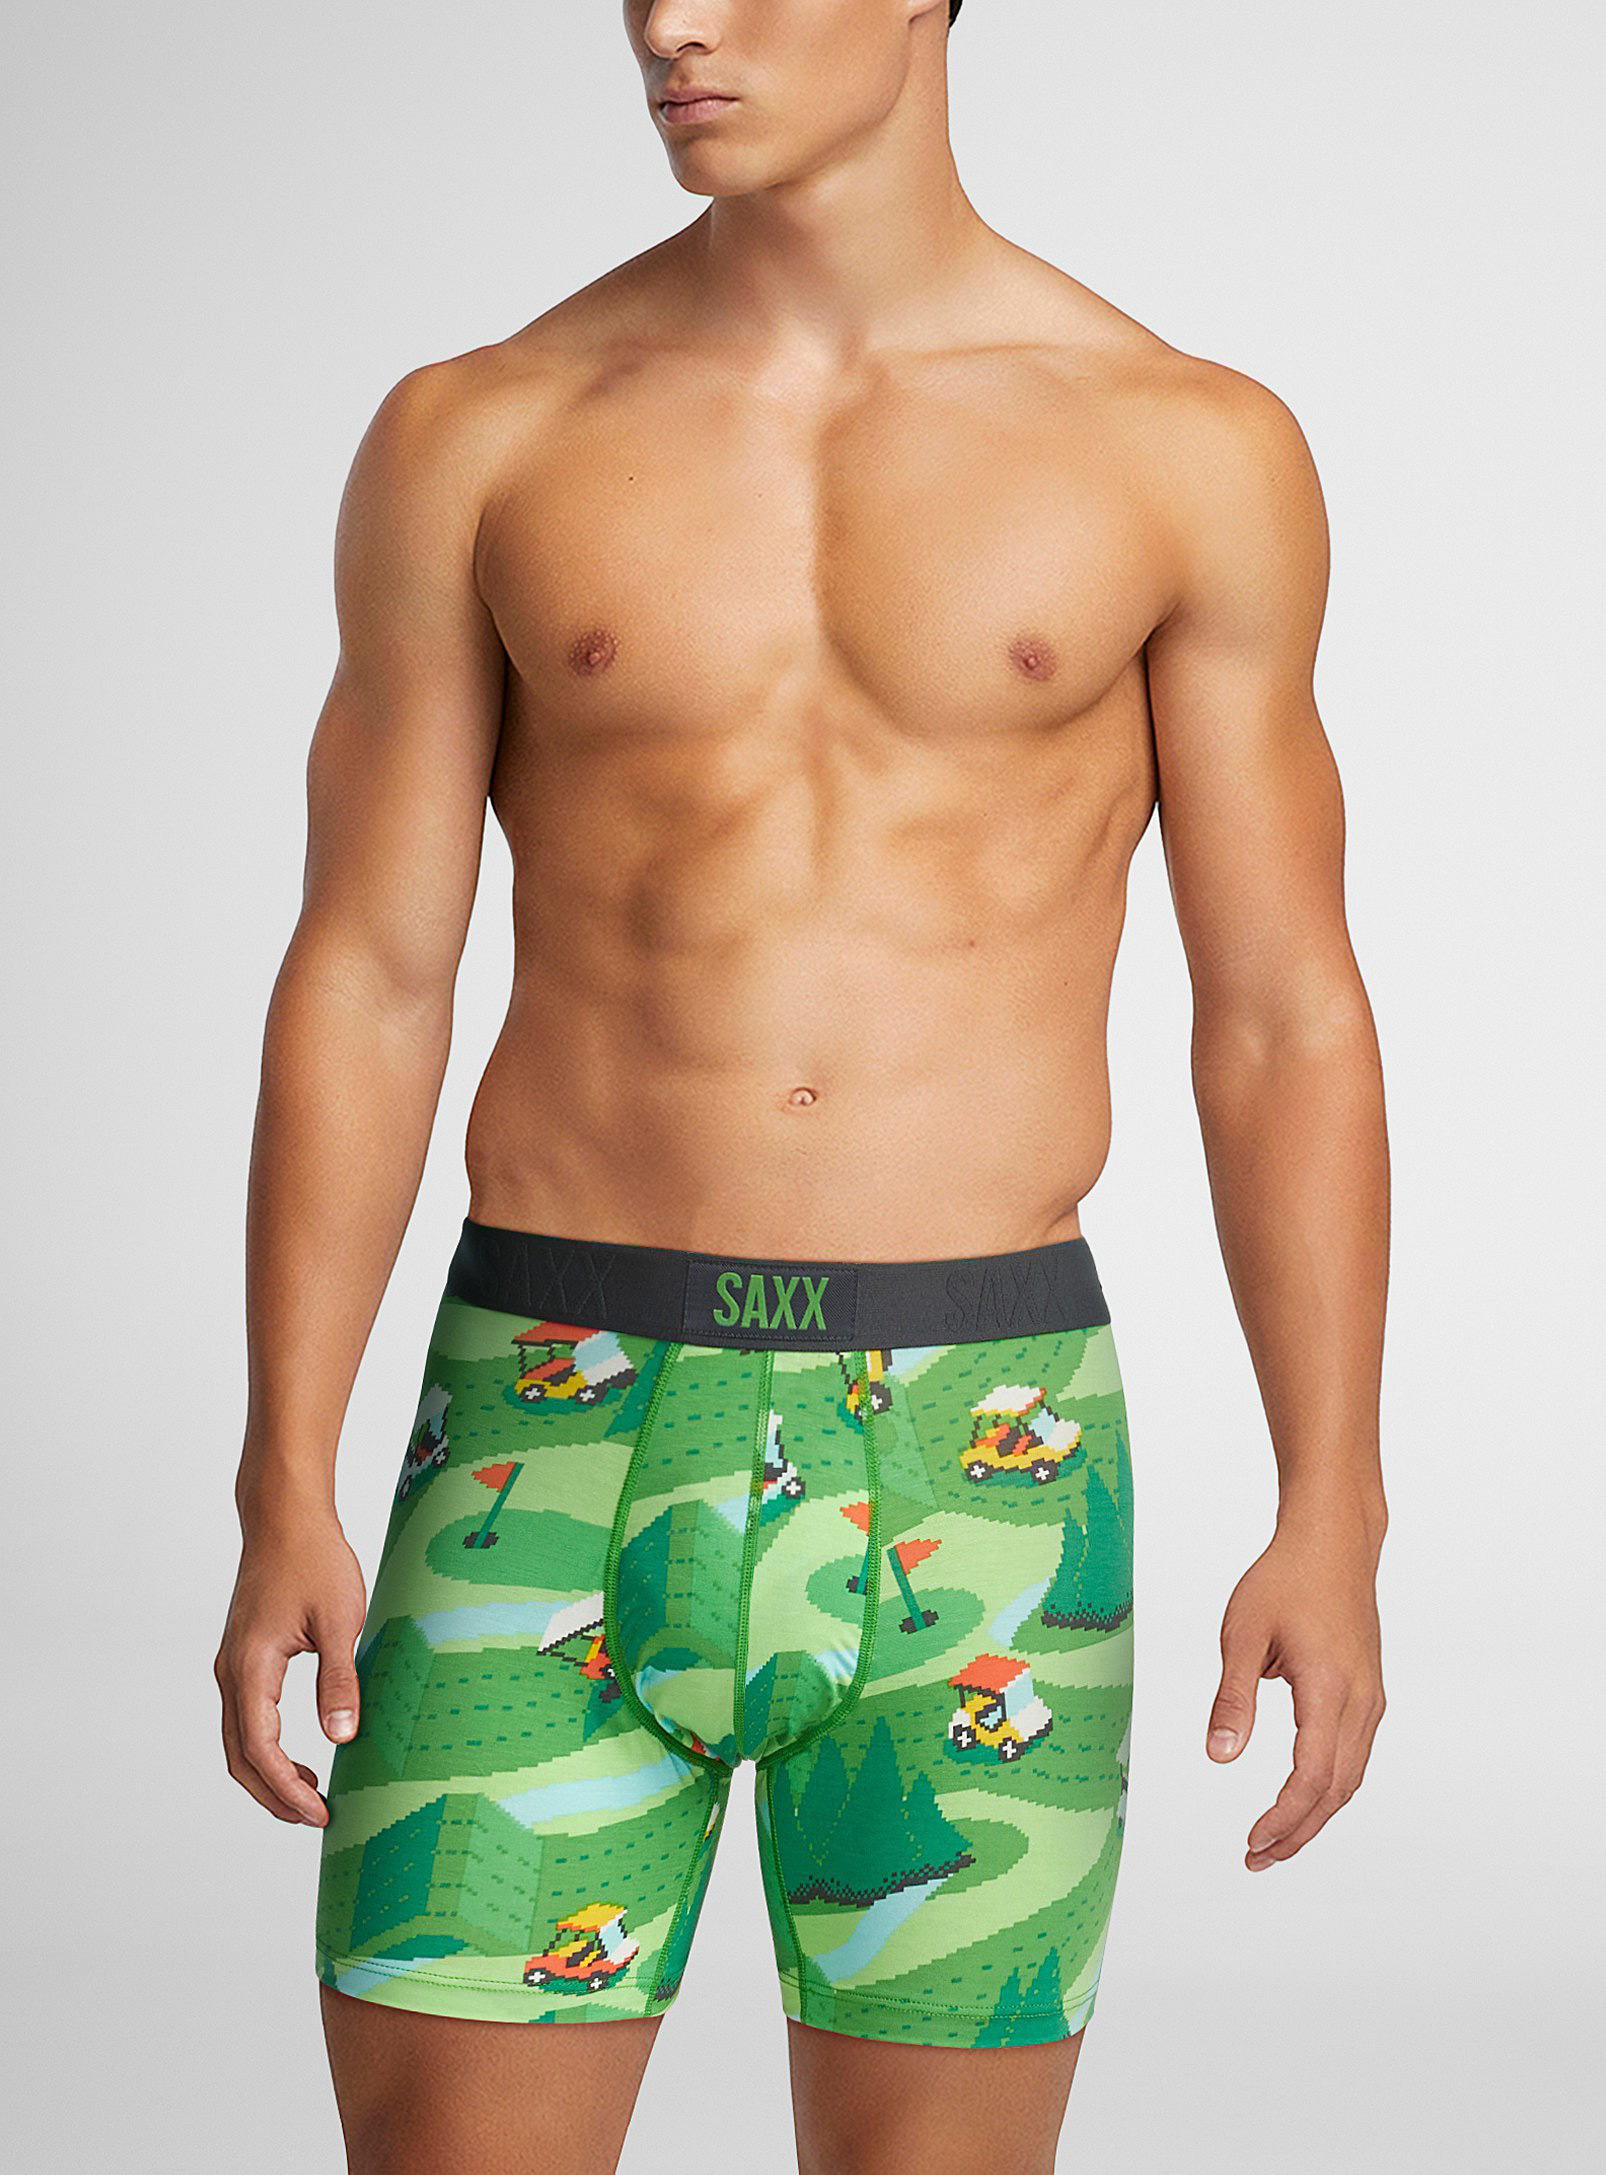 Saxx Golf Car Boxer Brief Vibe In Patterned Green